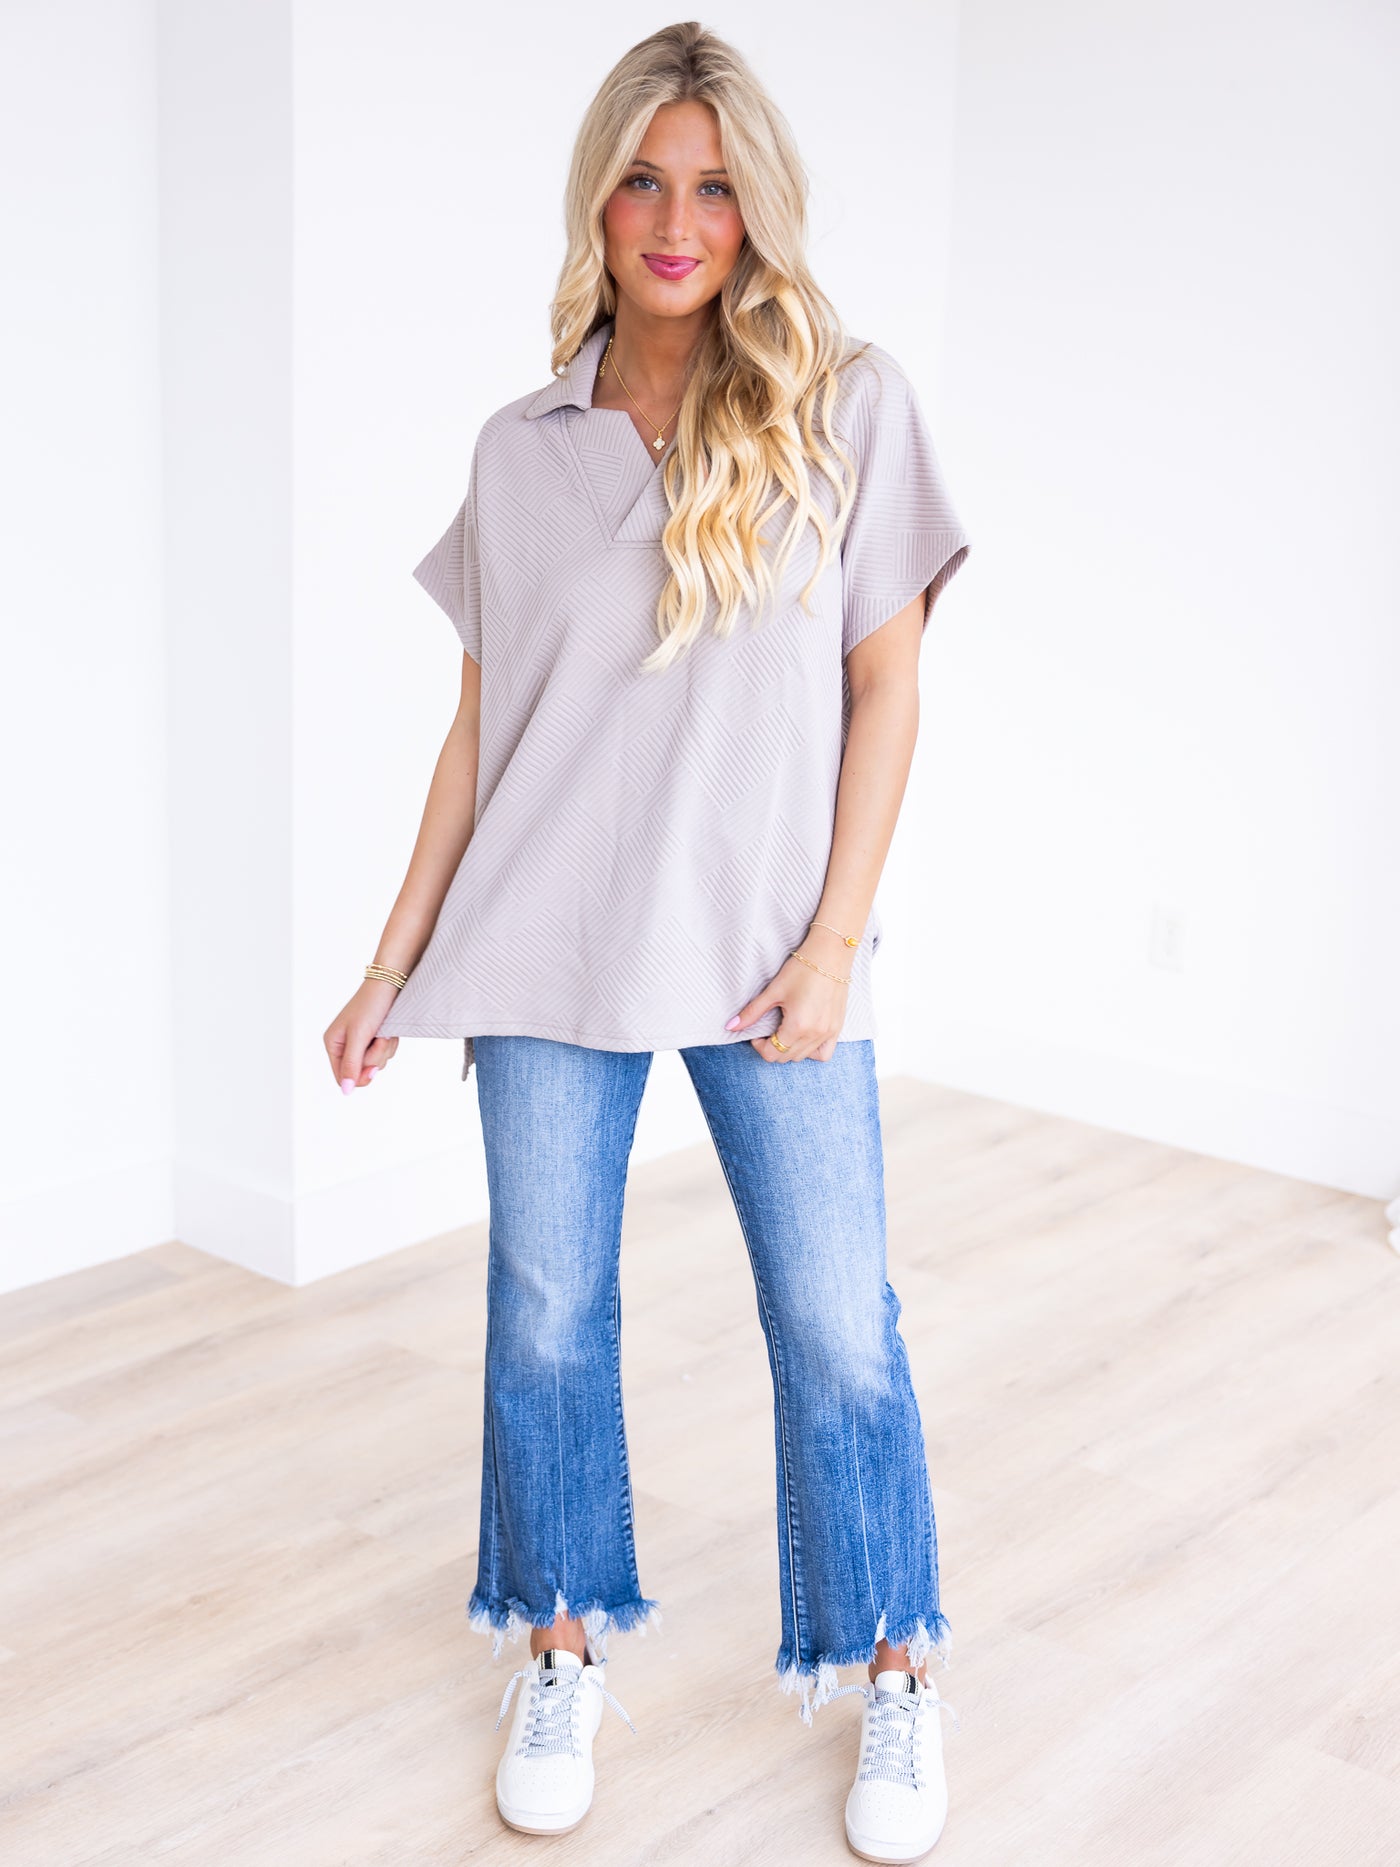 All About Me Textured Top